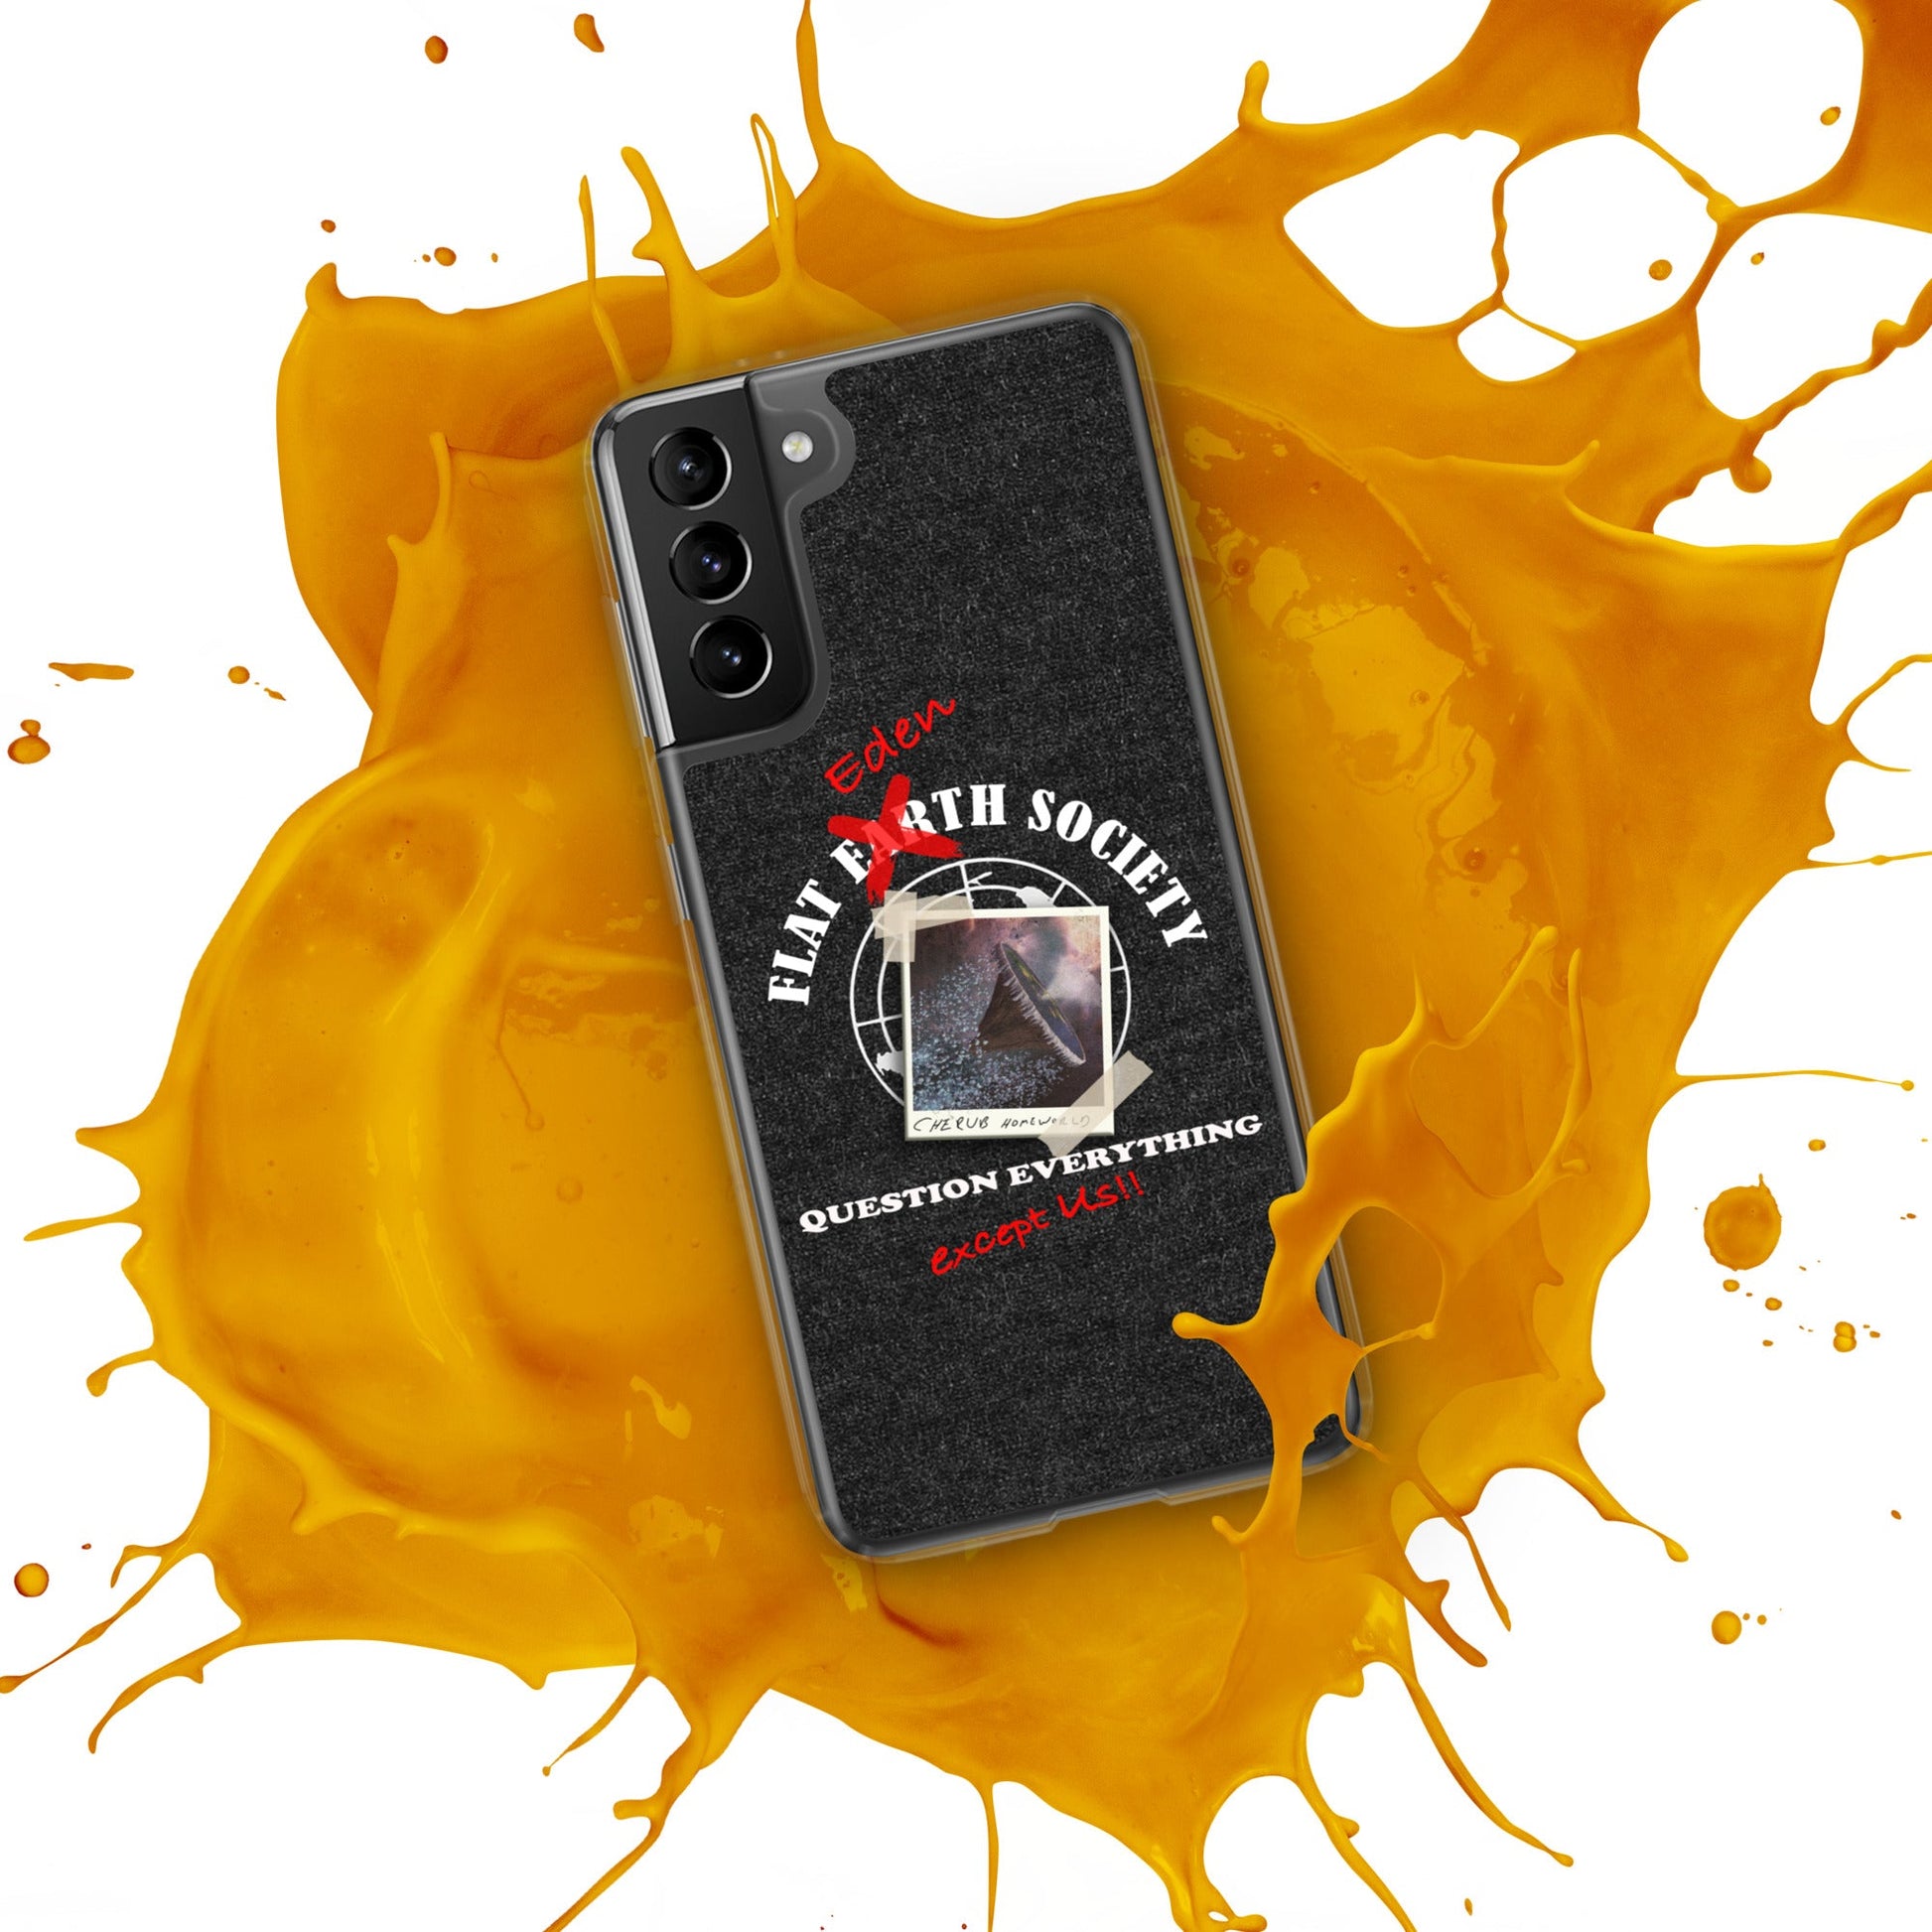 Samsung | Intergalactic Space Force 2 | Flat Eden Society - Spectral Ink Shop - Mobile Phone Cases -7213222_9945